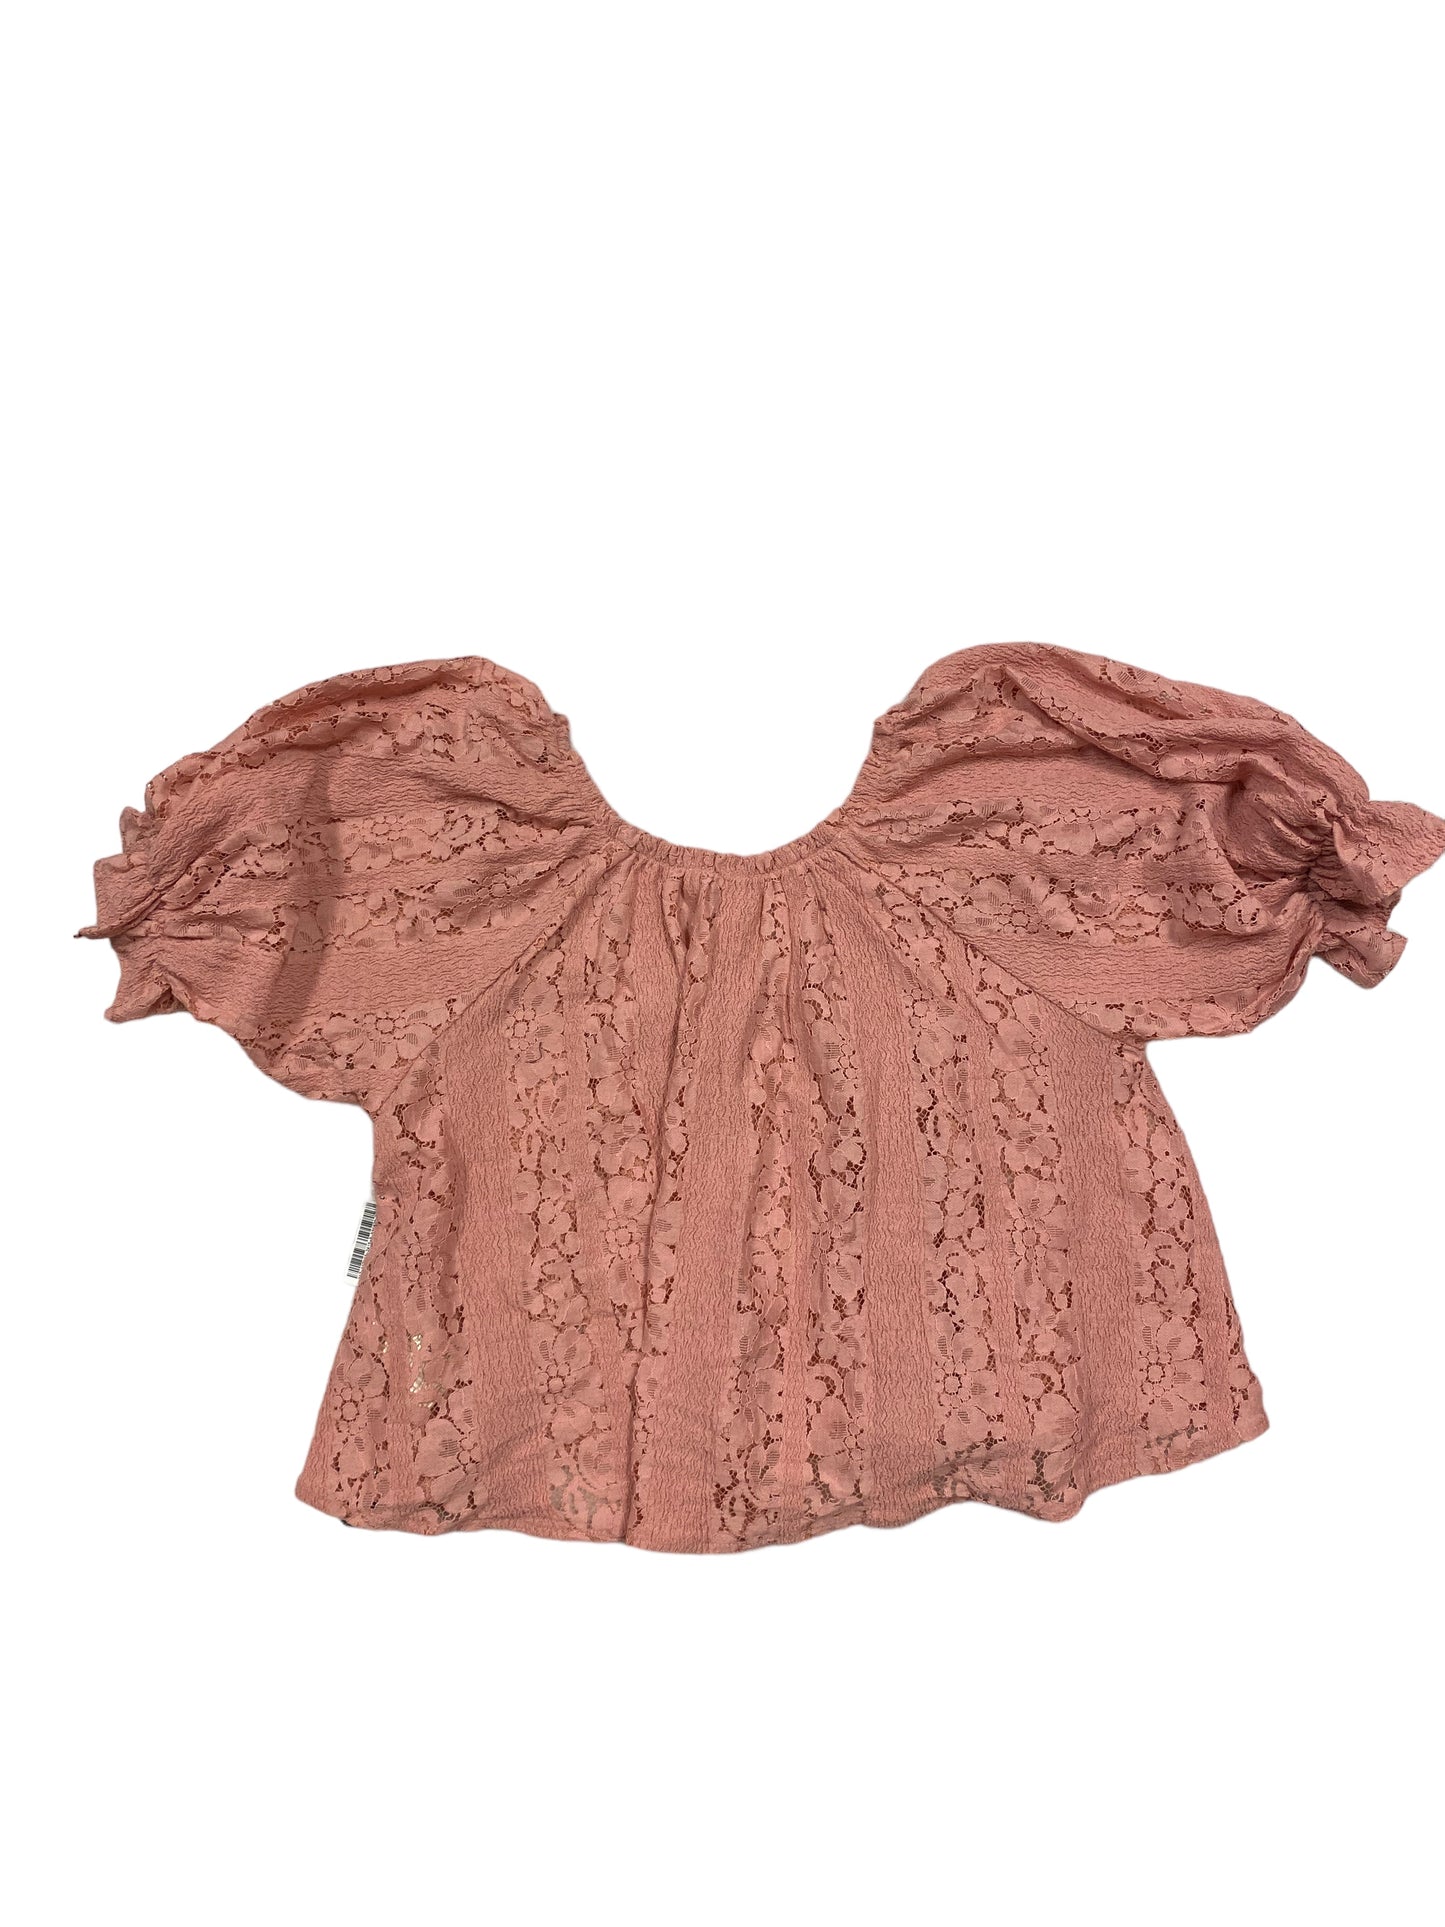 Pink Top Short Sleeve Free People, Size S